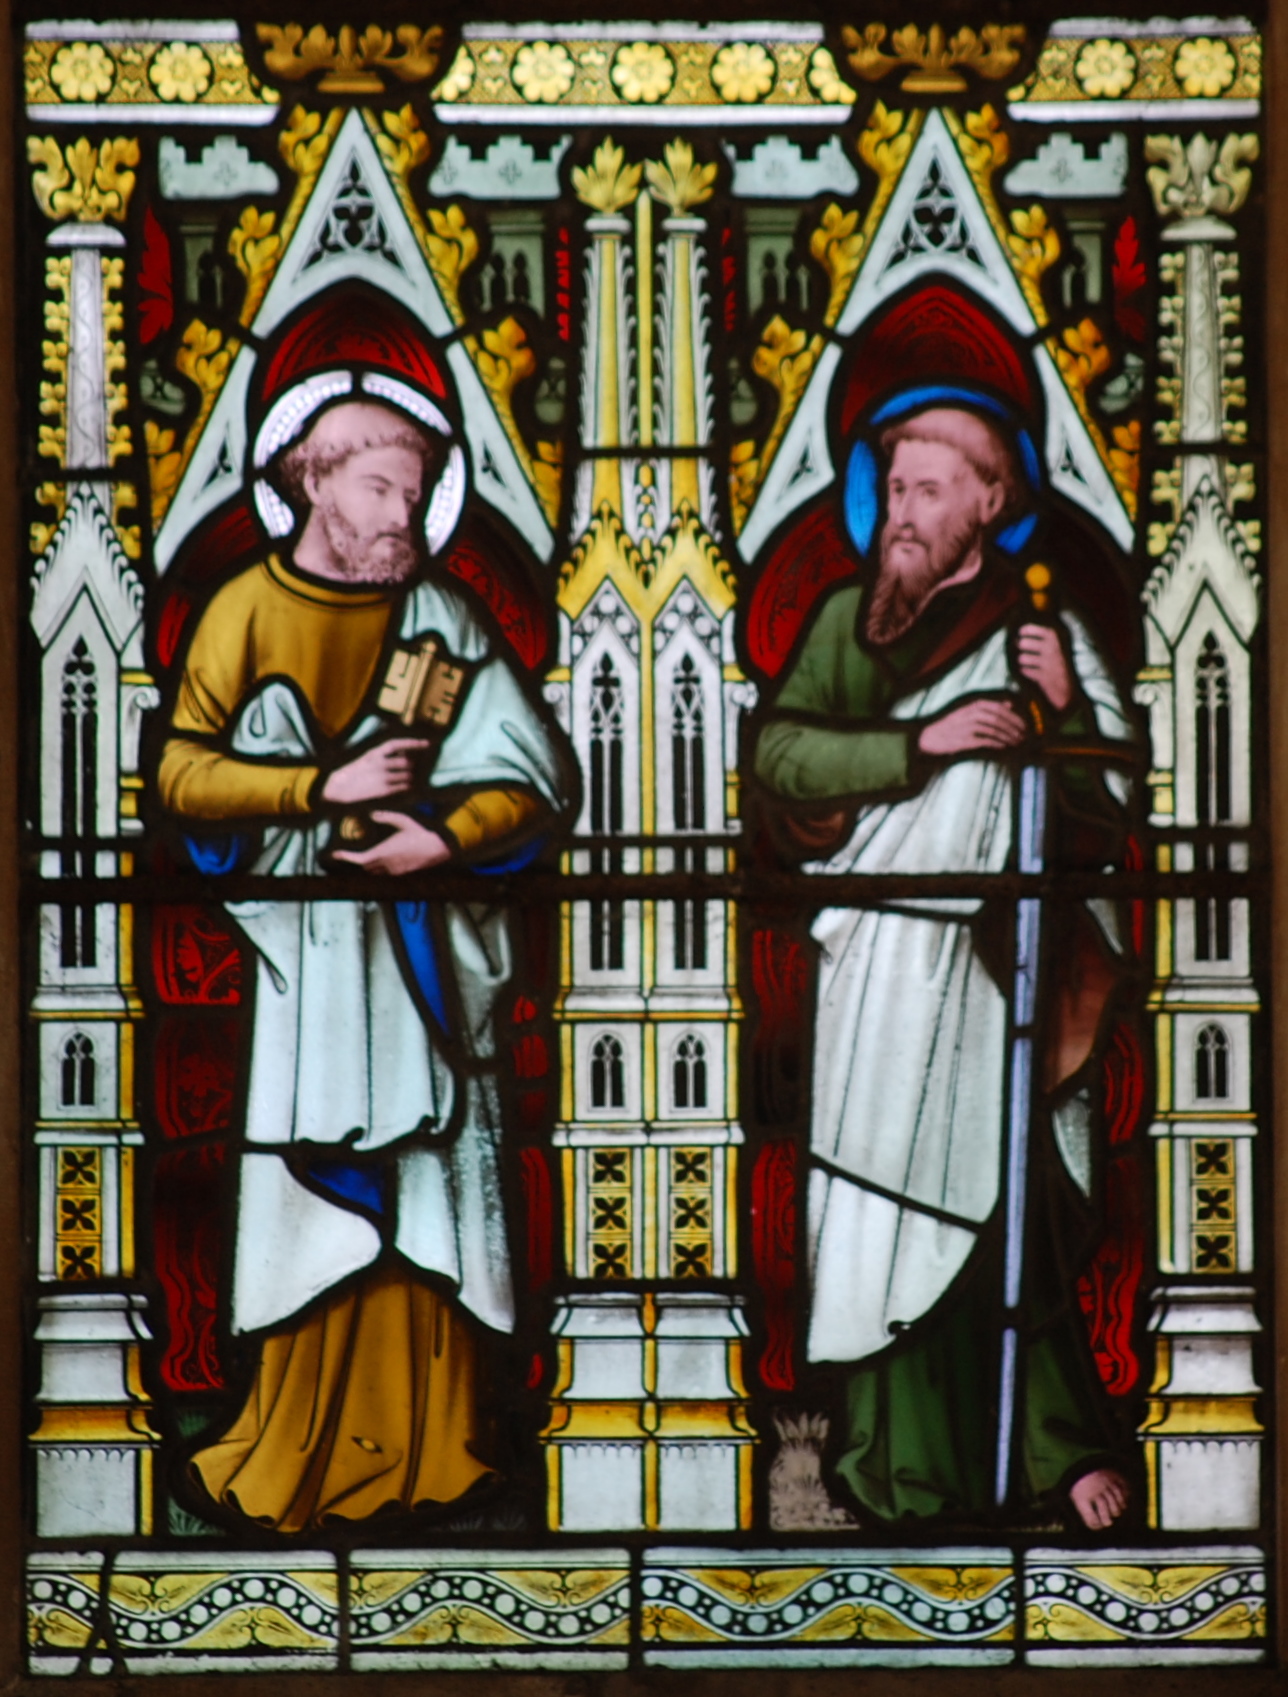 St. Peter and St. Paul. Detail from stained glass in the church of St Mary and St Lambert in Stonham Aspal in Suffolk dans immagini sacre